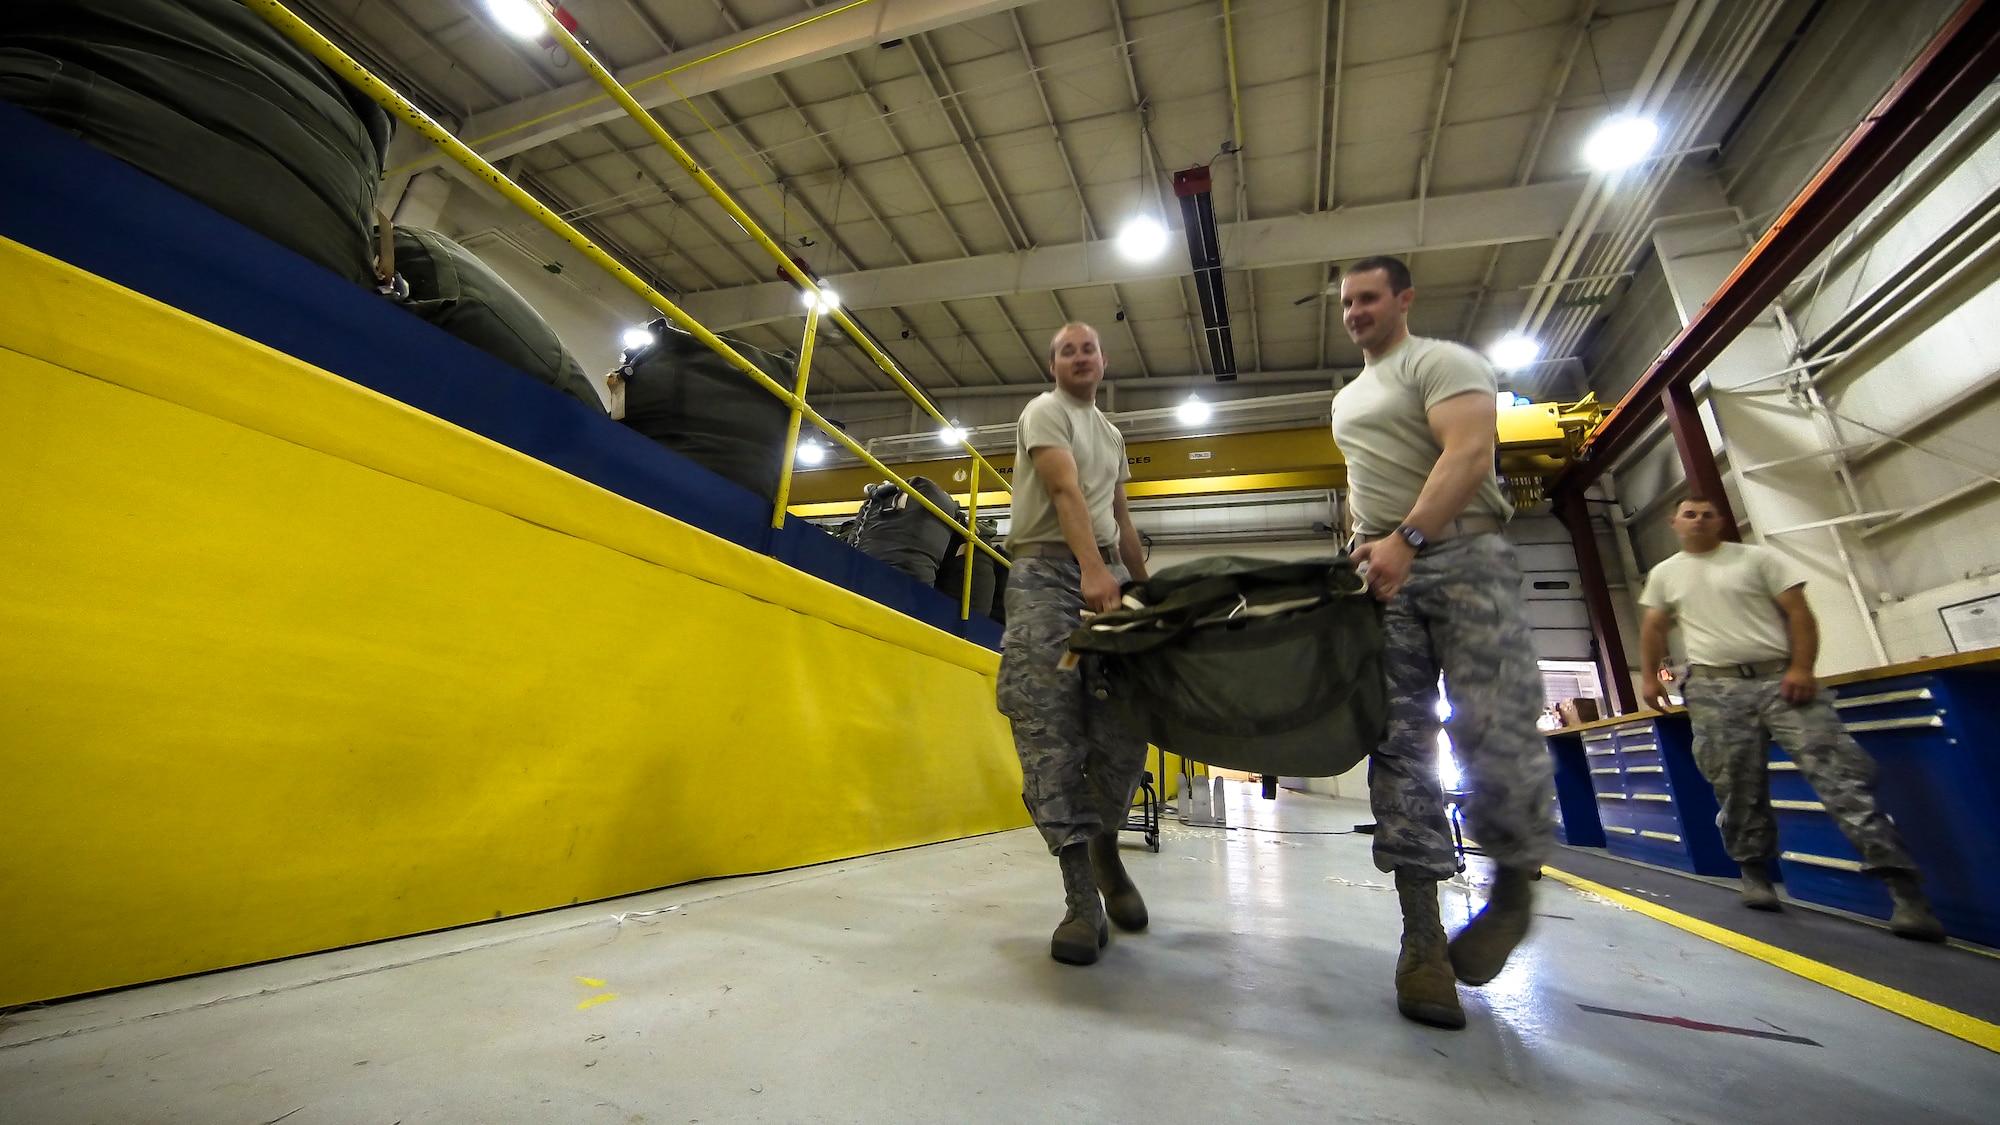 Technical Sgt. Jesse Sorrell (left) and Technical Sgt. Joshua Ellis carry a G-12E Type V platform parachute after recovering it from the dropzone on June 6, 2015 to store it for the next training air drop. The Airman from the 182d Airlift Wing, Small Air Terminal, Peoria, Ill., check and repack the parachute after it was used in a recent C-130 air drop training mission with heavy equipment at the dropzone. (U.S. Air National Guard photo by Master Sgt. Scott Thompson/Released)